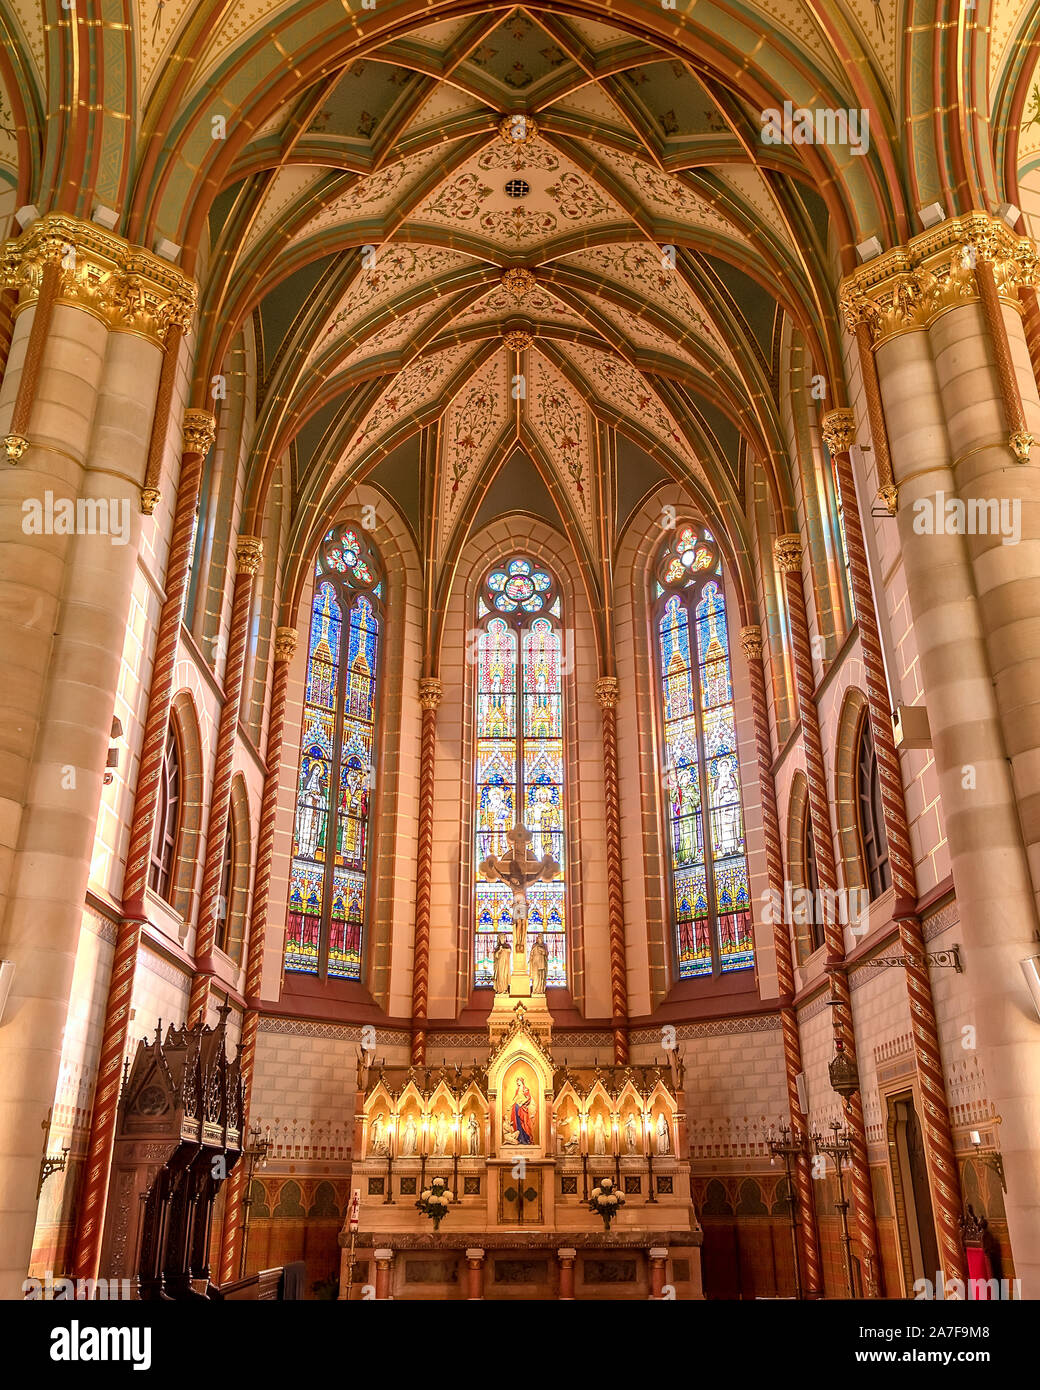 St. Elizabeth Parish Church of Árpád House is a less famous church in Budapest. Absoulutely beautiful place with amazing interior. Neogothic style hi Stock Photo